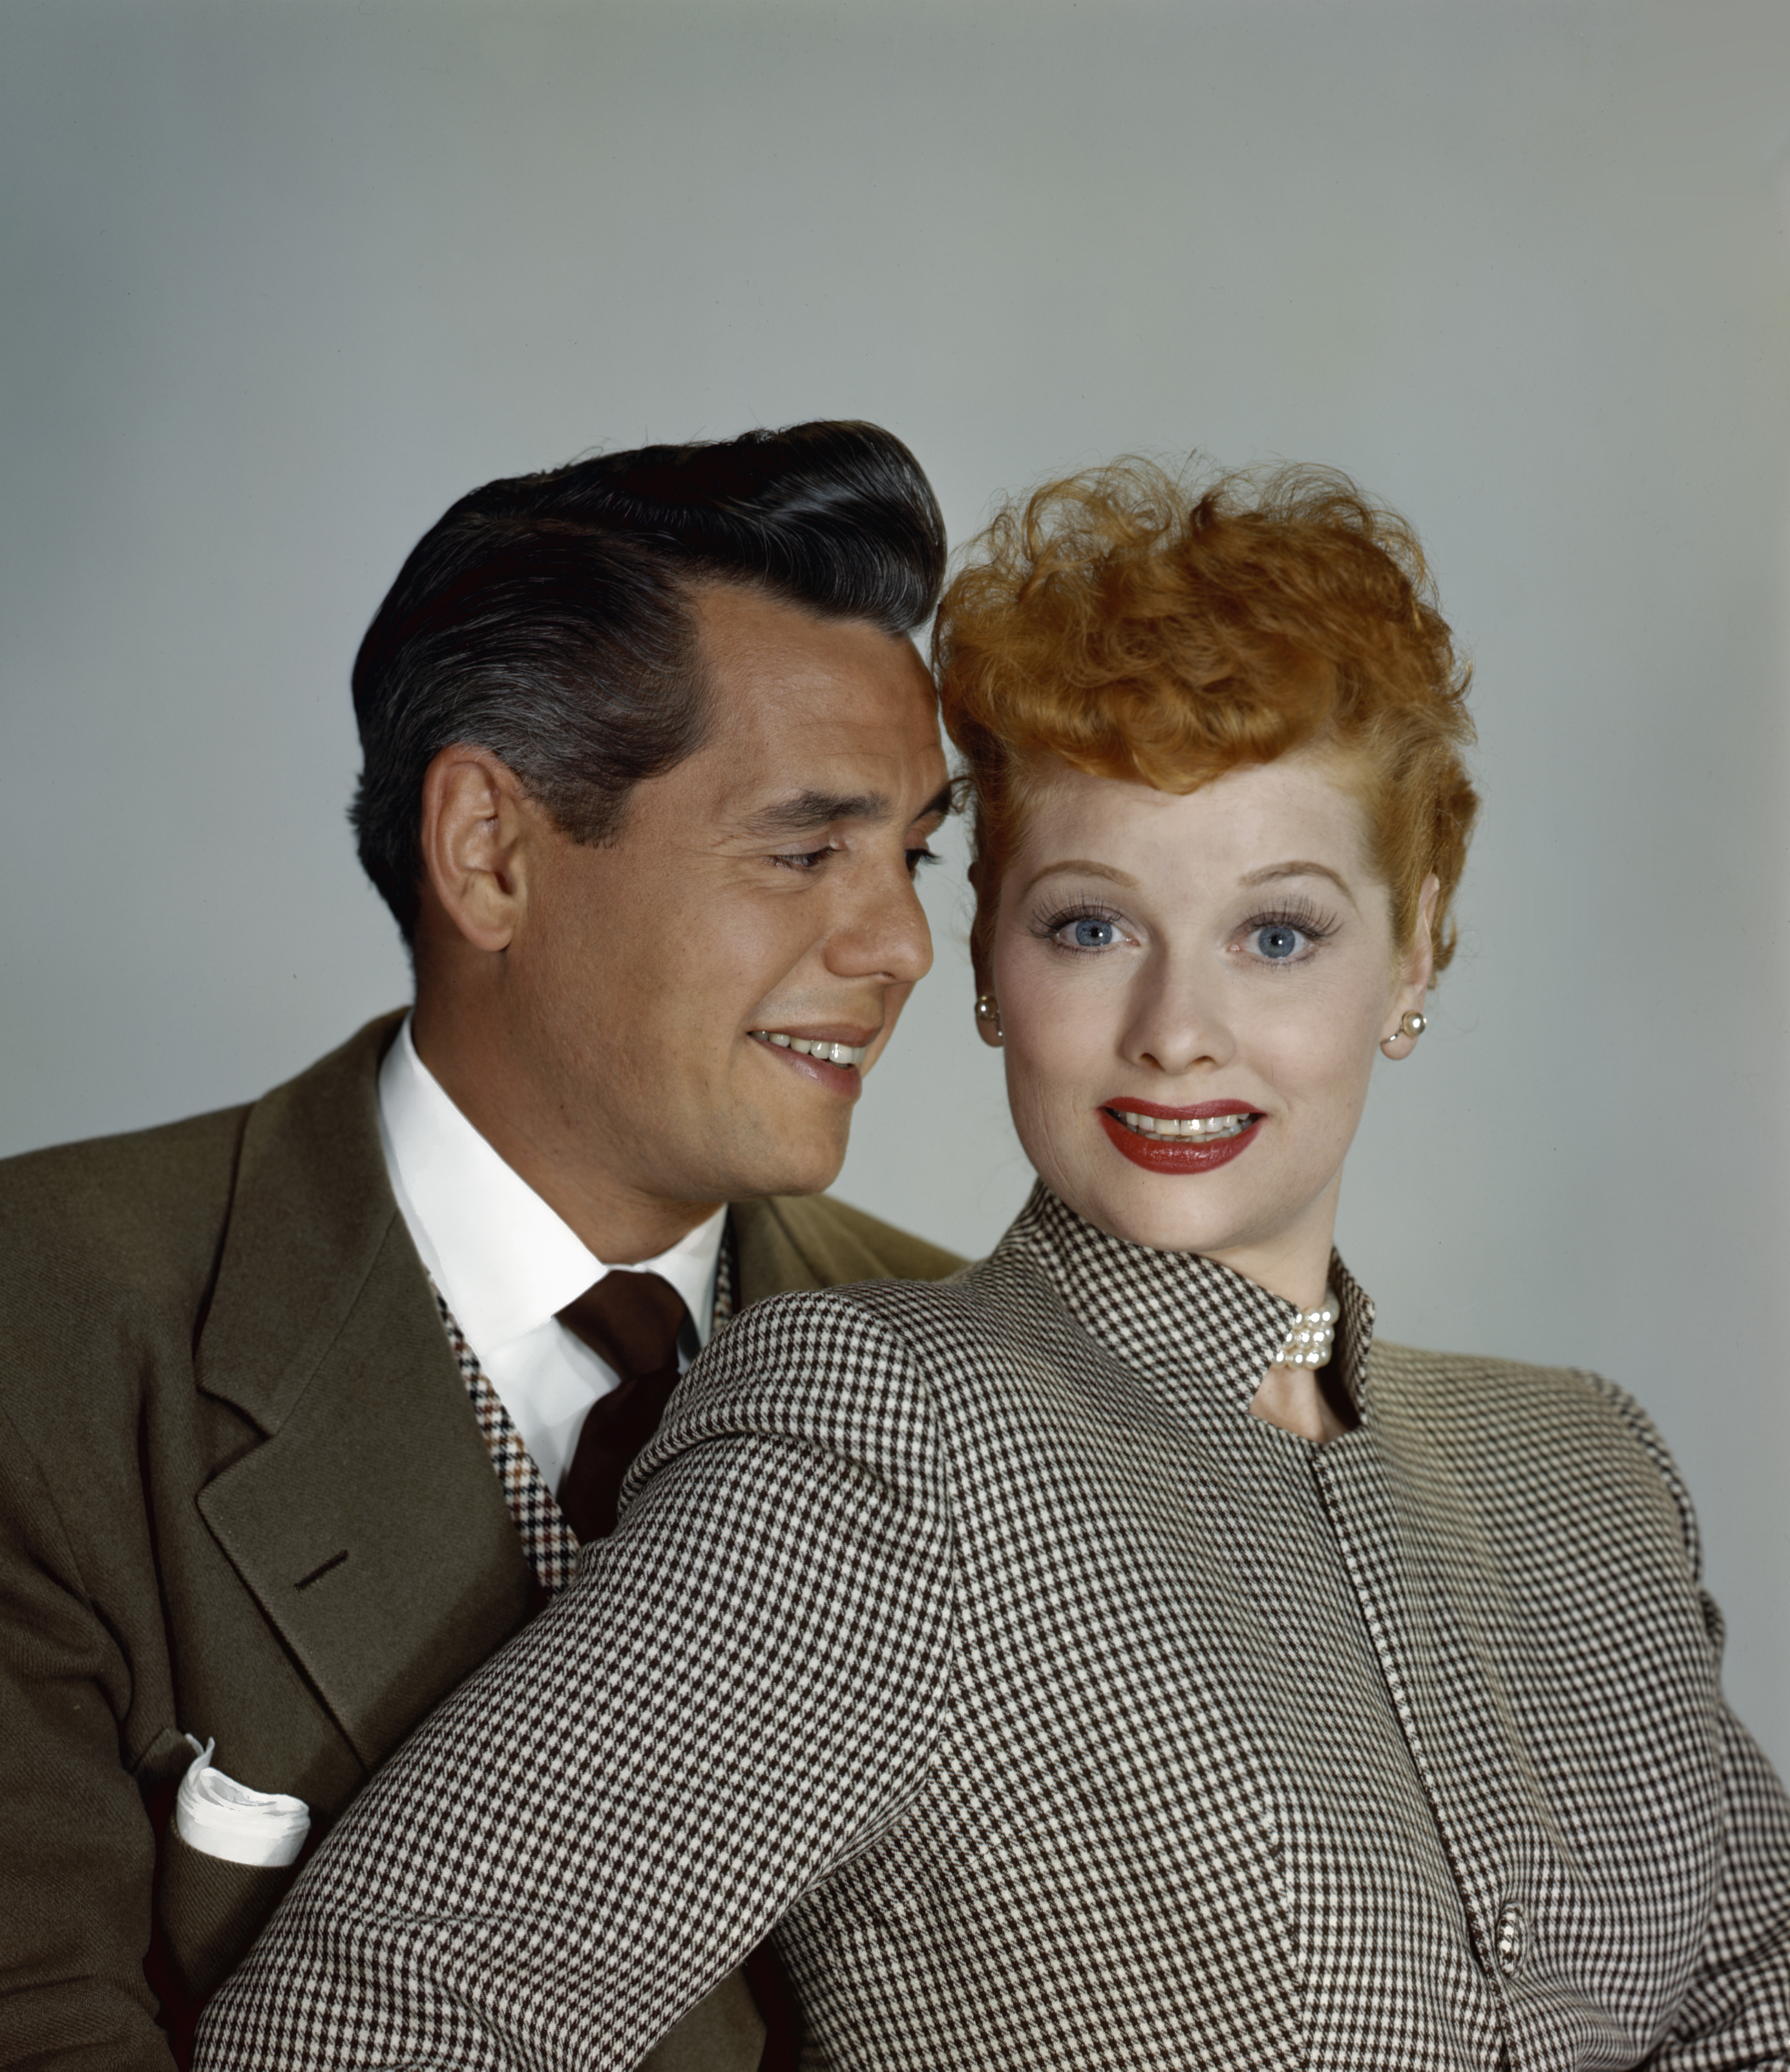 Actress Lucille Ball (R) and her husband actor Desi Arnaz circa 1950's. | Source: Getty Images